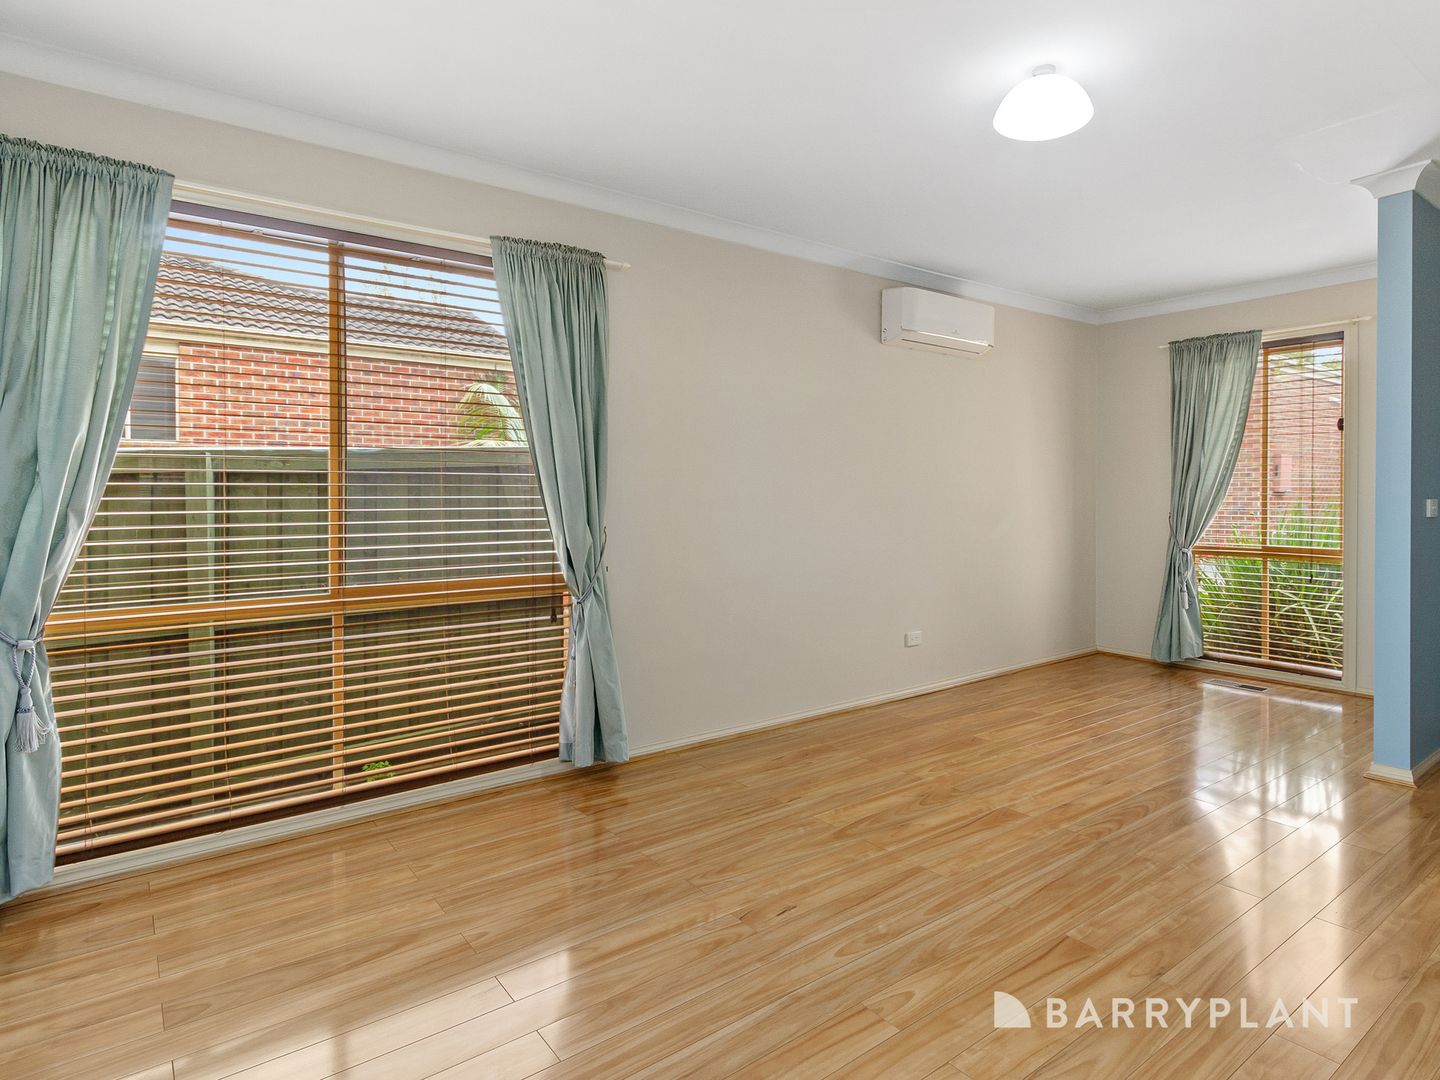 22/407 - 421 Scoresby Road, Ferntree Gully VIC 3156, Image 1